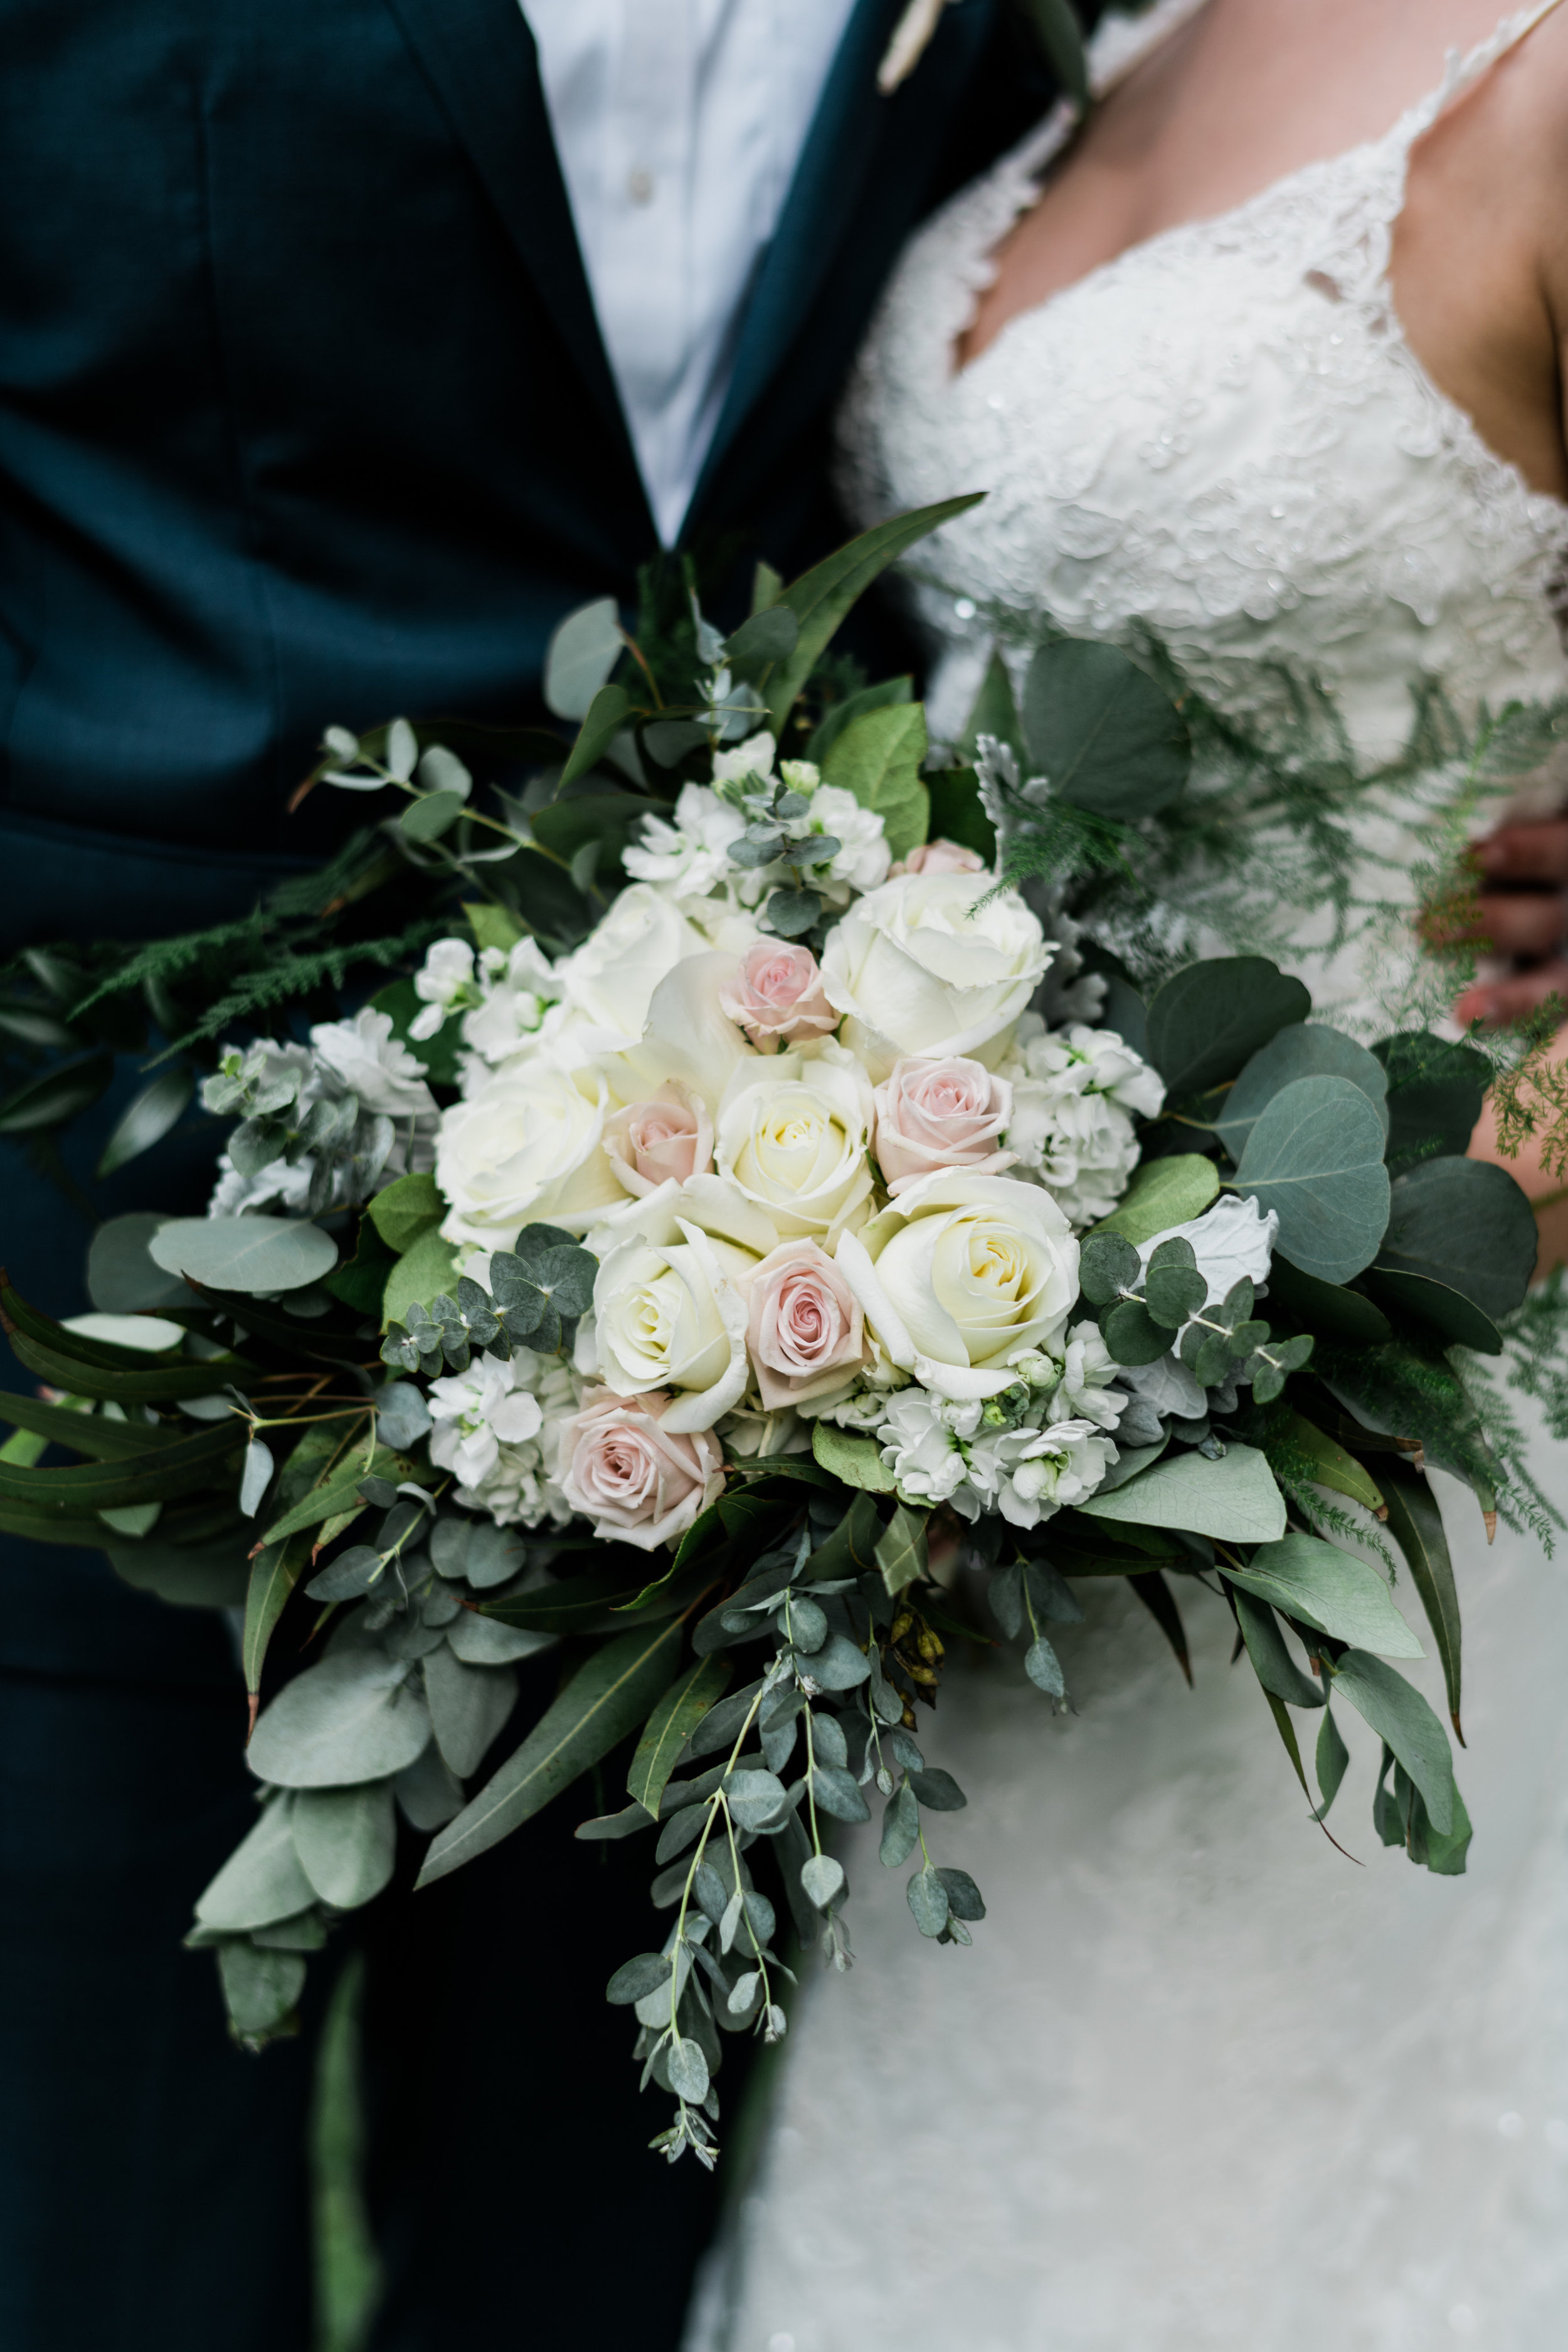 Classic Wedding - Green and White Wedding - Maryville, Tennessee Wedding - The Overwhelmed Bride Wedding Blog